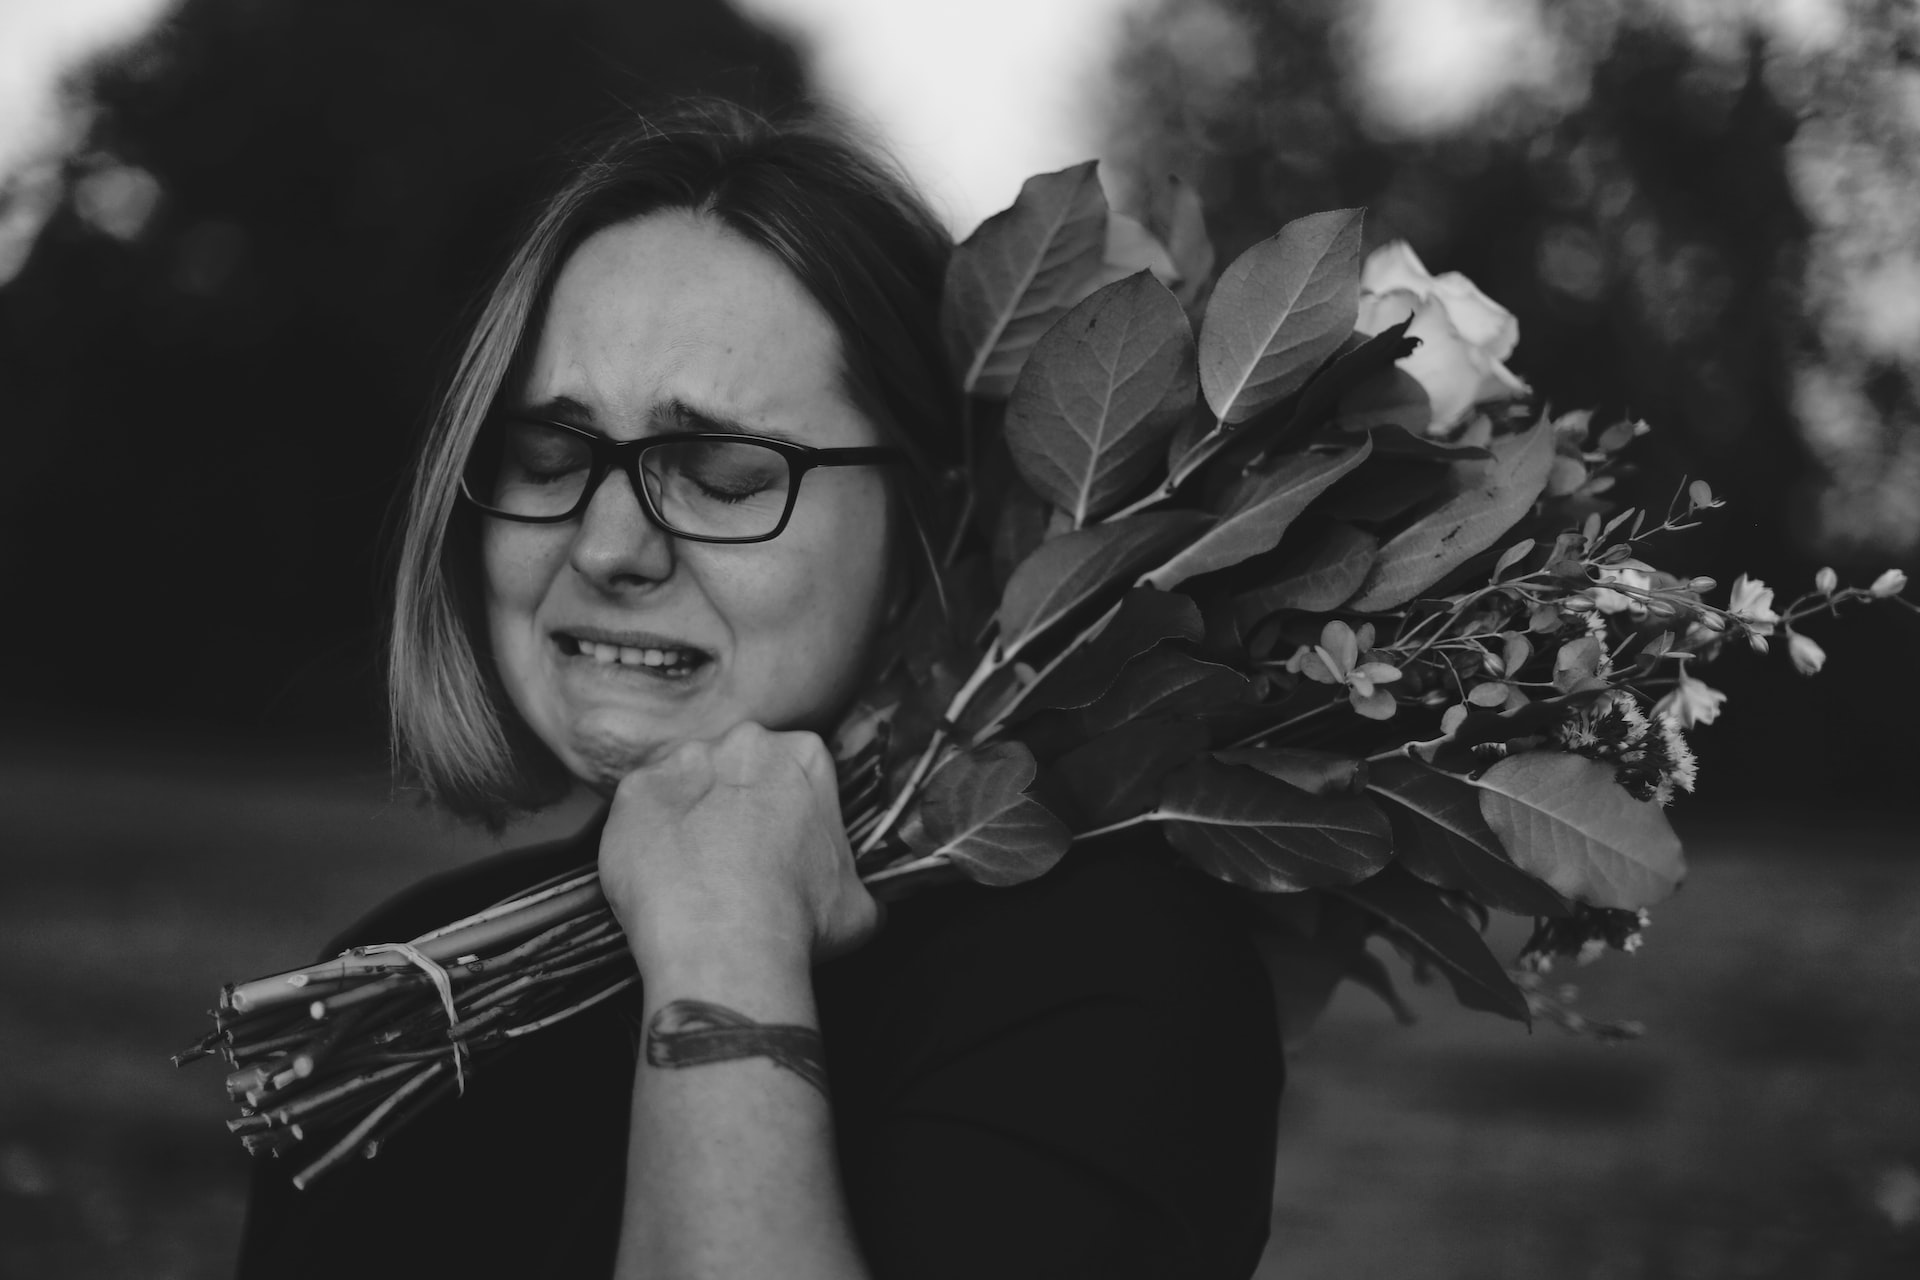 A lady crying while holding a bunch of flowers on her shoulder